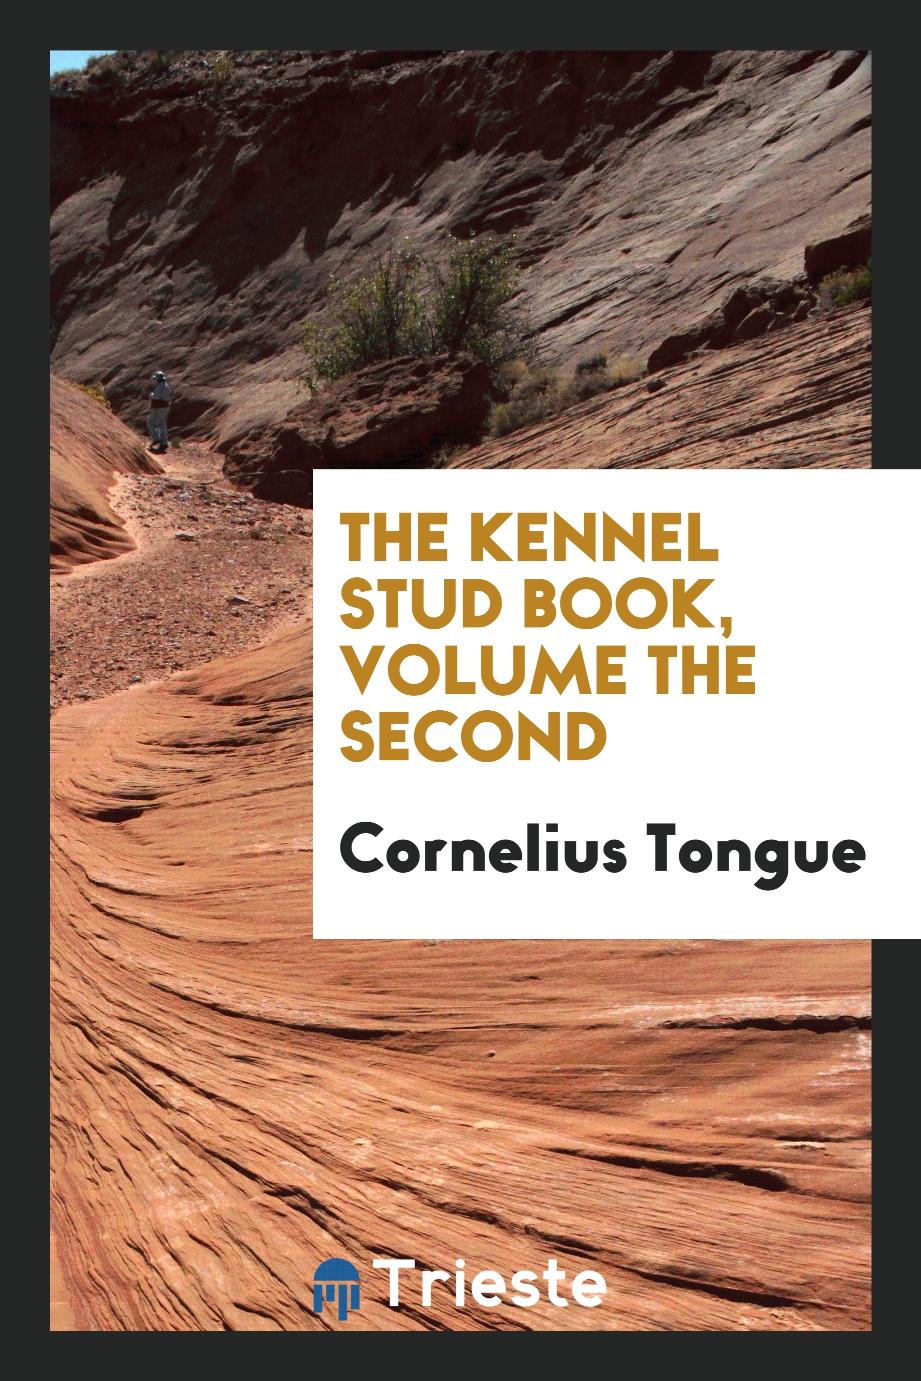 The Kennel Stud Book, Volume the Second